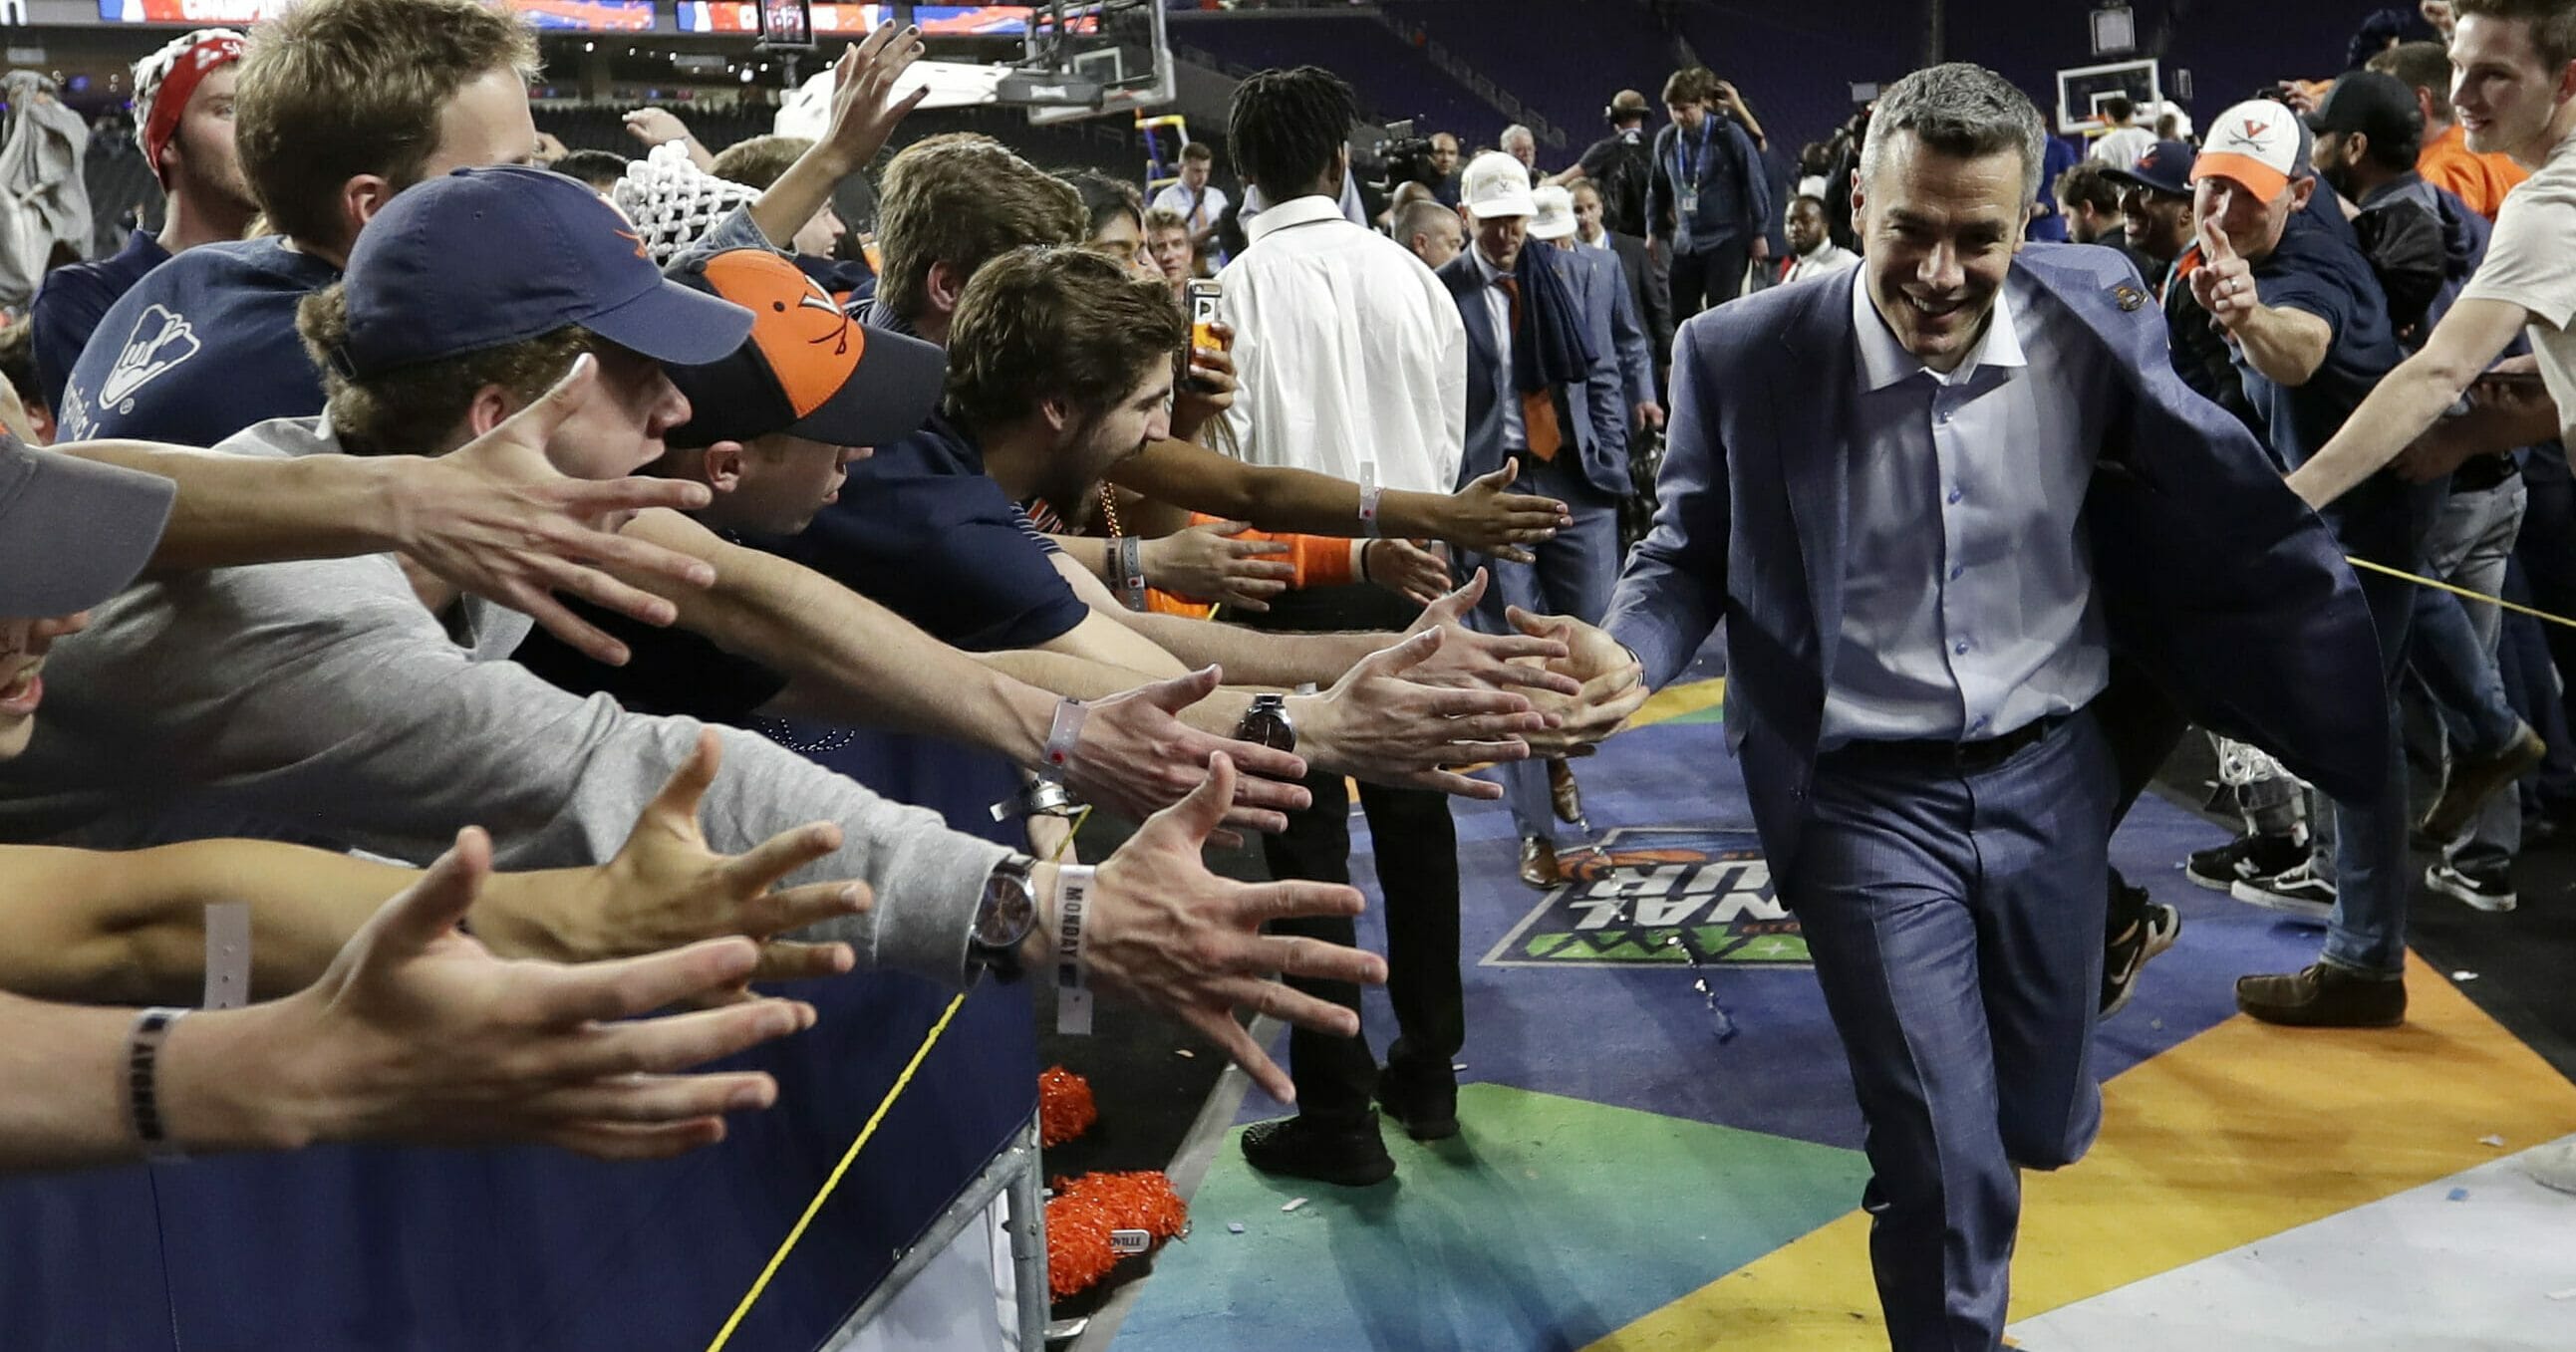 Virginia head coach Tony Bennett celebrates with fans after the championship game against Texas Tech in the Final Four NCAA college basketball tournament, Monday, April 8, 2019, in Minneapolis. Virginia won 85-77 in overtime.